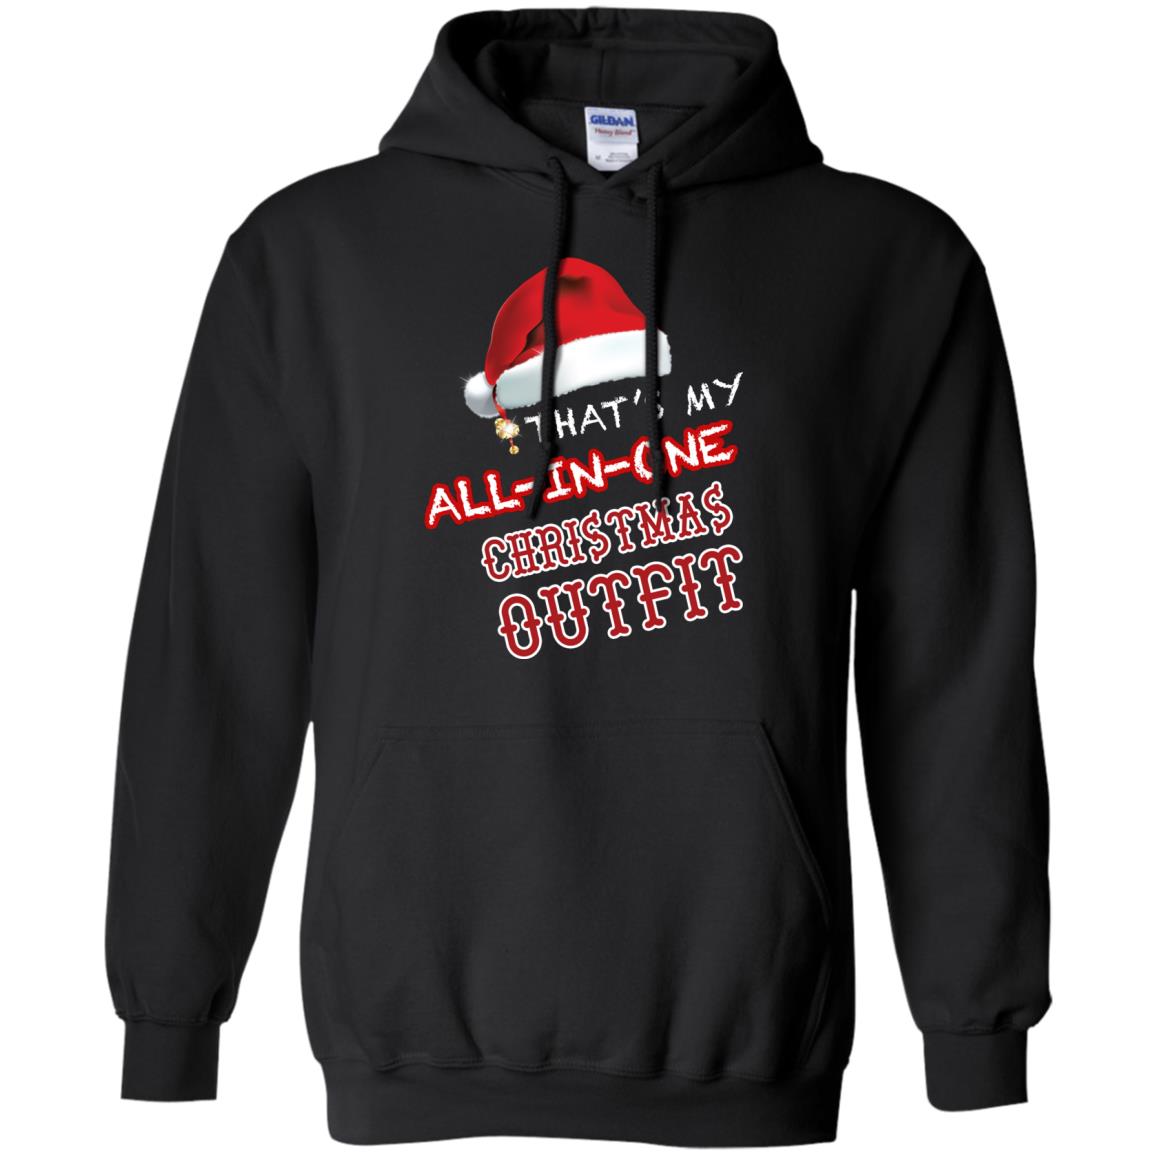 That's My All In One Christmas Outfit X-mas Gift Shirt For Mens Or WomensG185 Gildan Pullover Hoodie 8 oz.